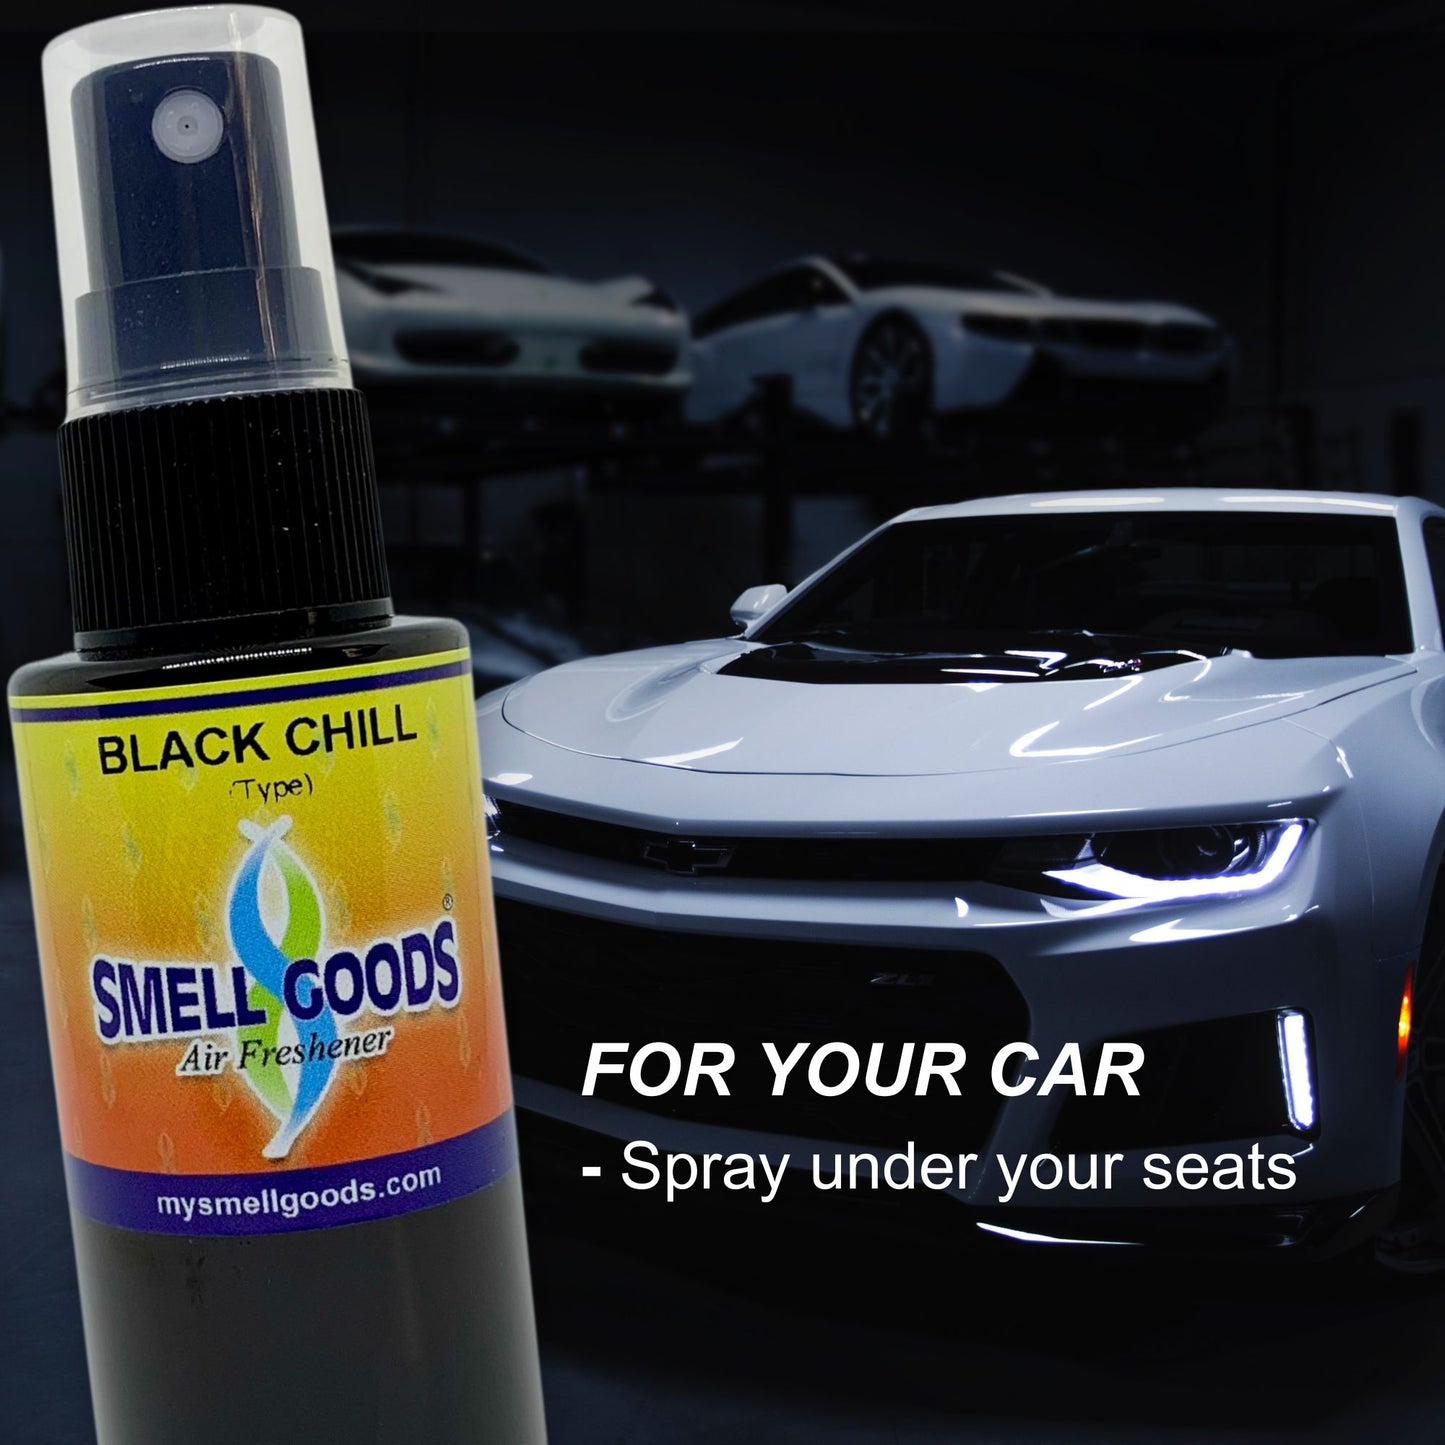 Black Chill (Type) Air Freshener by Smell Goods can be used in your car.